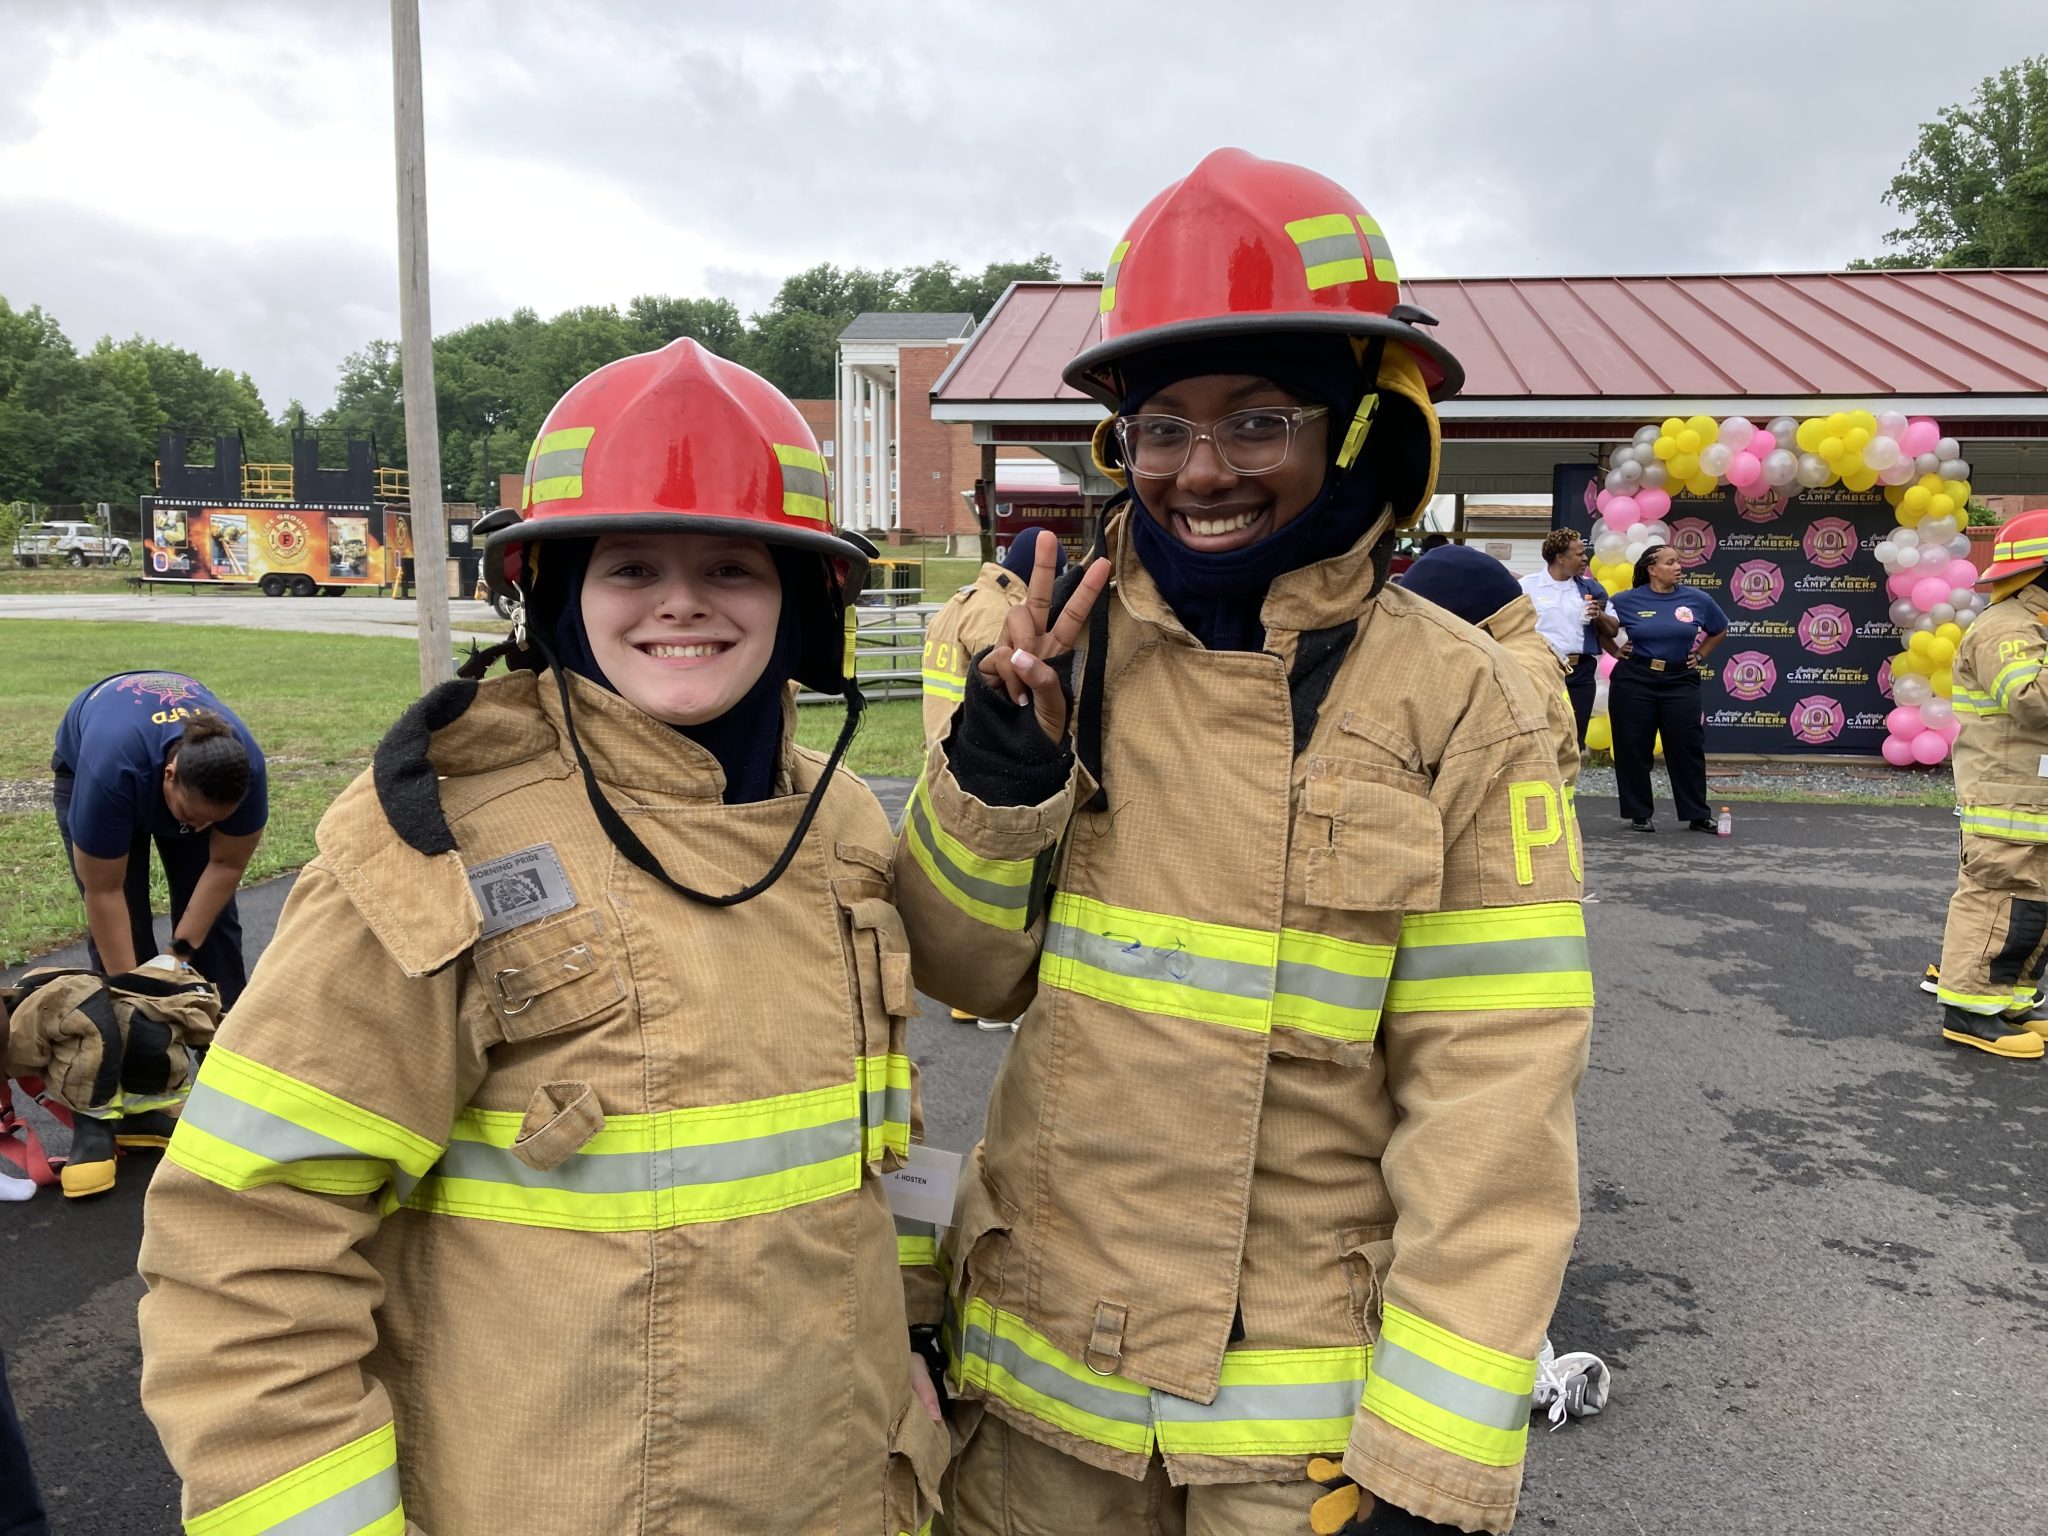 Prince George’s County Fire Department Camp Embers